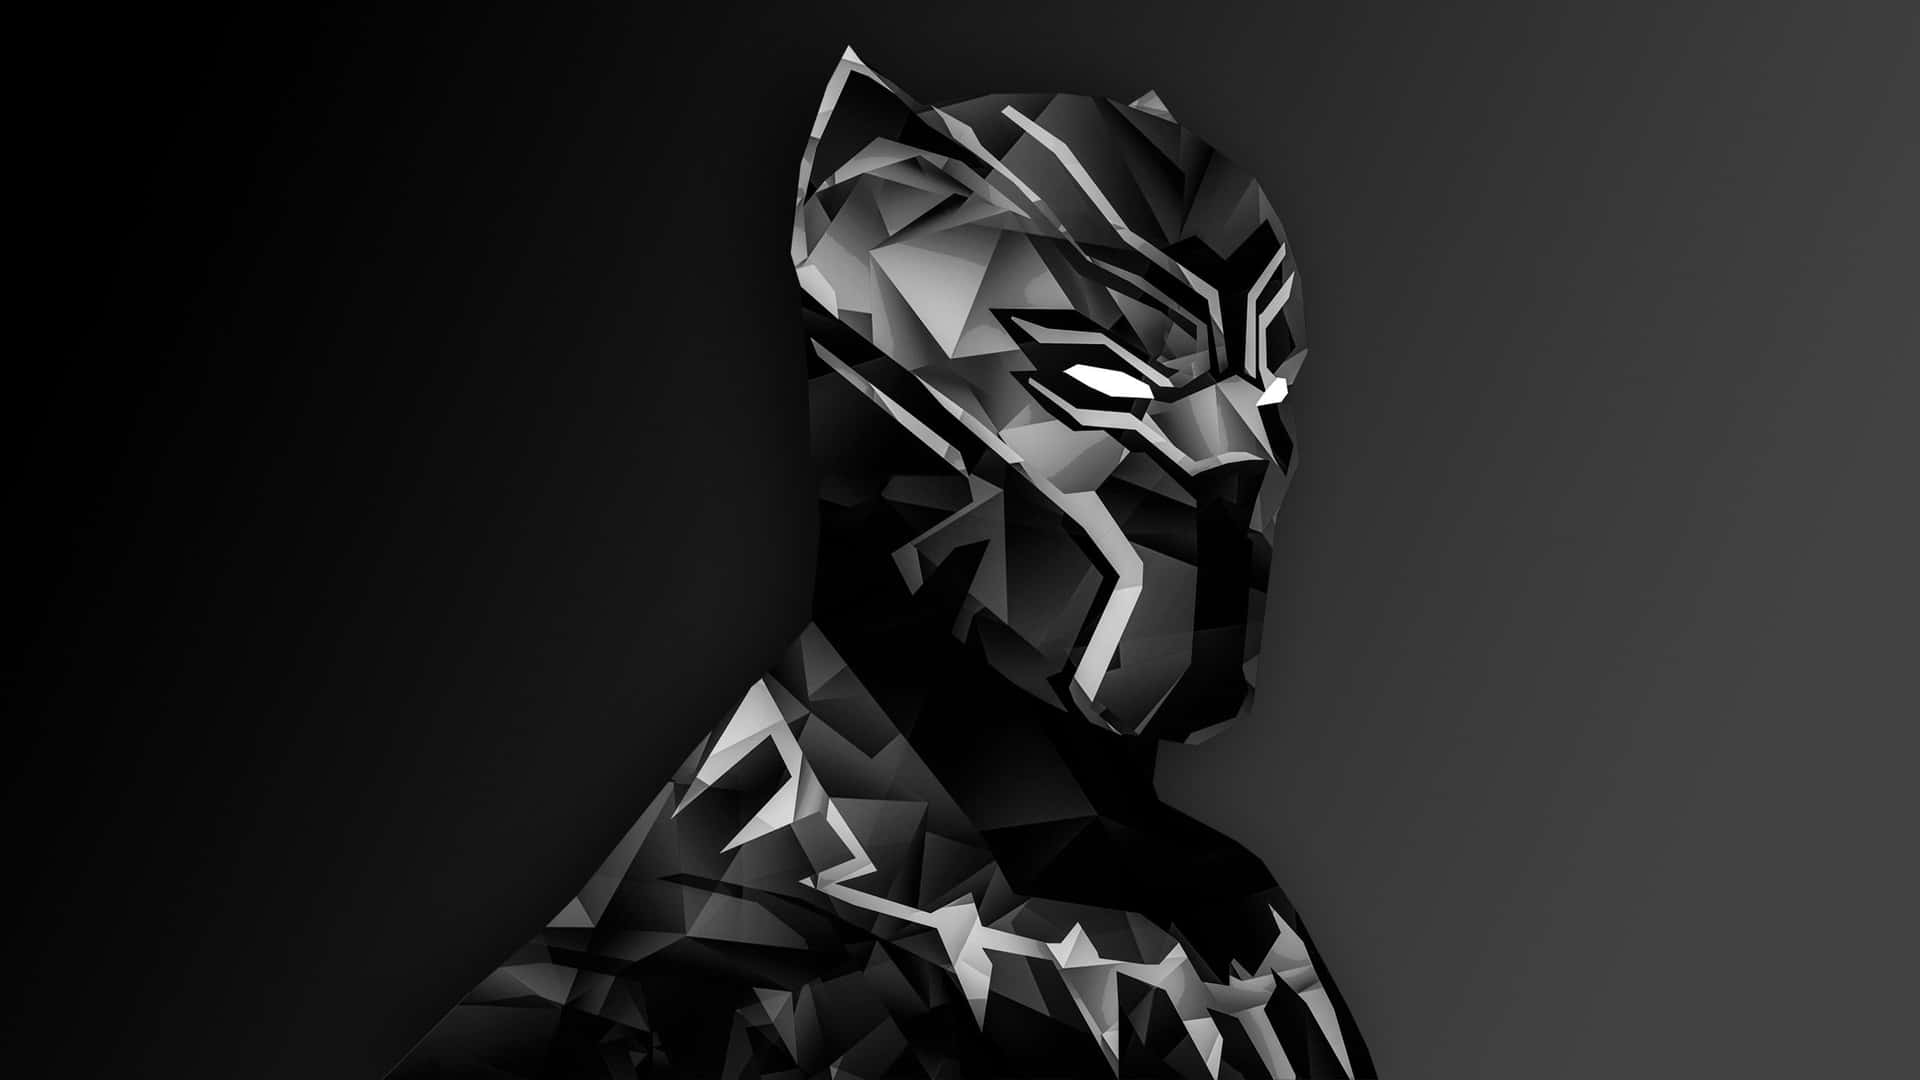 2560x1440 Black Panther Abstract Art Wallpaper